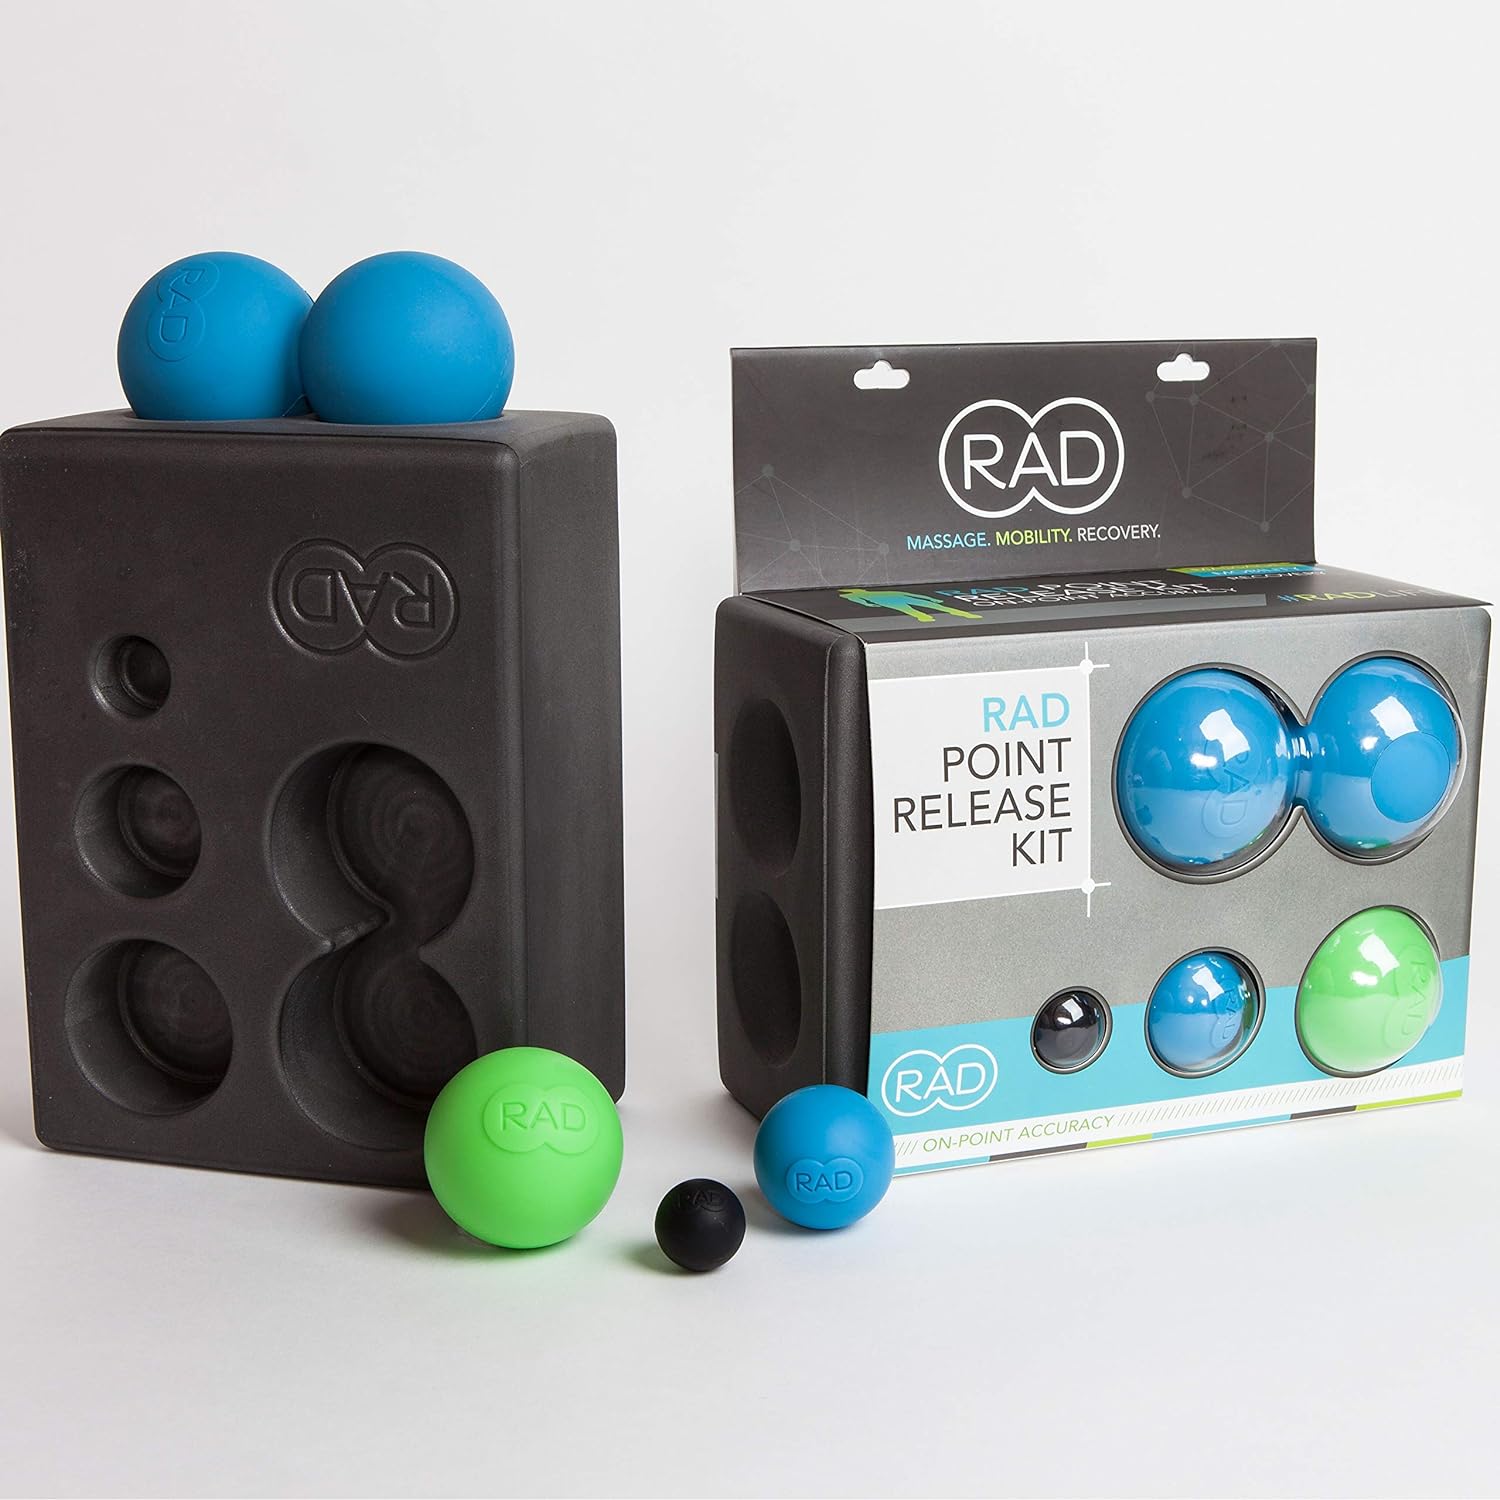 RAD Point Release Kit / 5-in-1 Massage Tool Kit with Block, Massage Balls and Peanut Roller for Self Massage, Mobility and Recovery